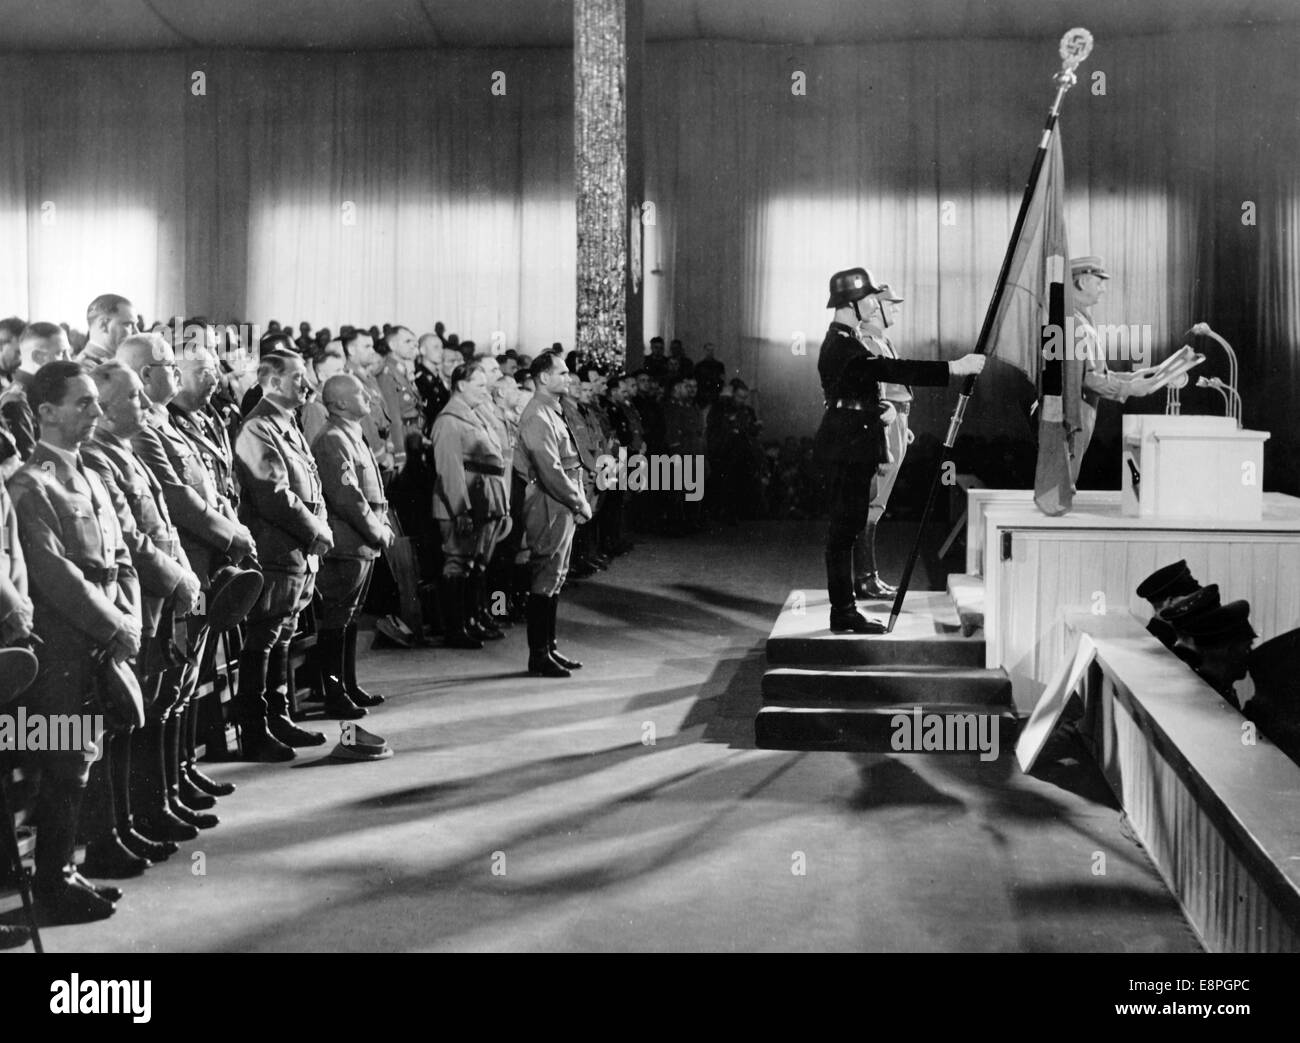 Nuremberg Rally 1936 in Nuremberg, Germany - Opening of the party congress at Luitpold Hall at the Nazi party rally grounds . Chief of staff of the Sturmabteilung (SA) Viktor Lutze reads out the names of the 'martyrs of the Beer Hall Putsch'. Behind him: Standartenfuehrer Jakob Grimminger holding the 'Blood Flag'. First Row L-R: Reich Minister Joseph Goebbels, Head of the German Labour Front Robert Ley, Reich Treasurer Franz Xaver Schwarz, Reichsfuehrer of the Schutzstaffel (SS) Heinrich Himmler, Adolf Hitler, Gauleiter Julius Streicher, Hermann Goering, Reich Minister Bernhard Rust. In fro Stock Photo